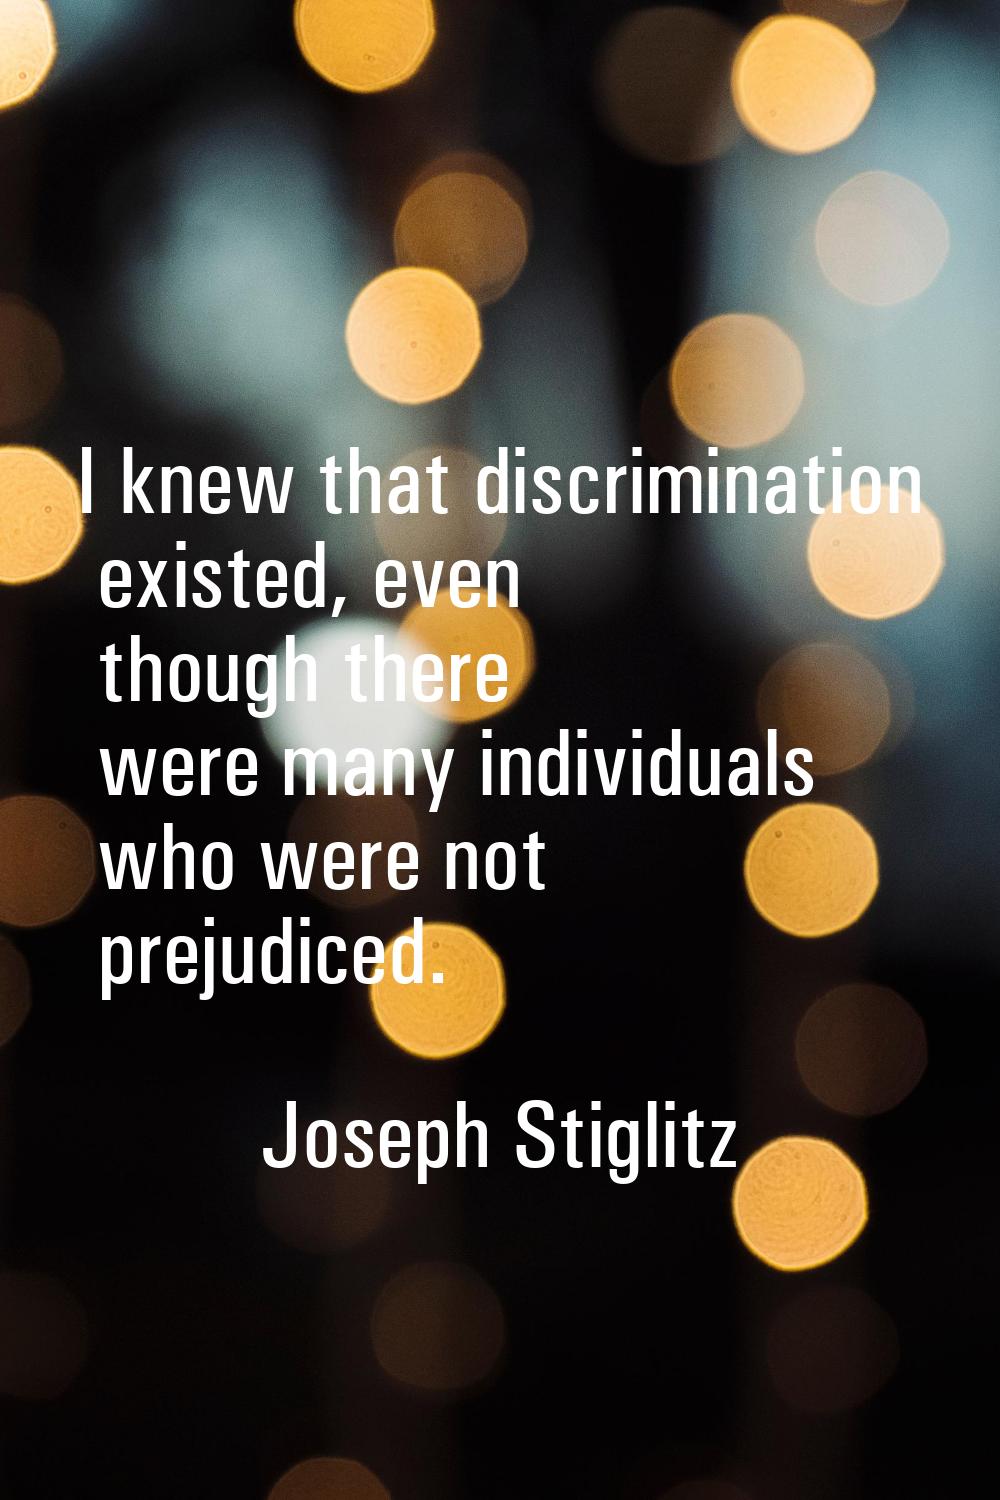 I knew that discrimination existed, even though there were many individuals who were not prejudiced